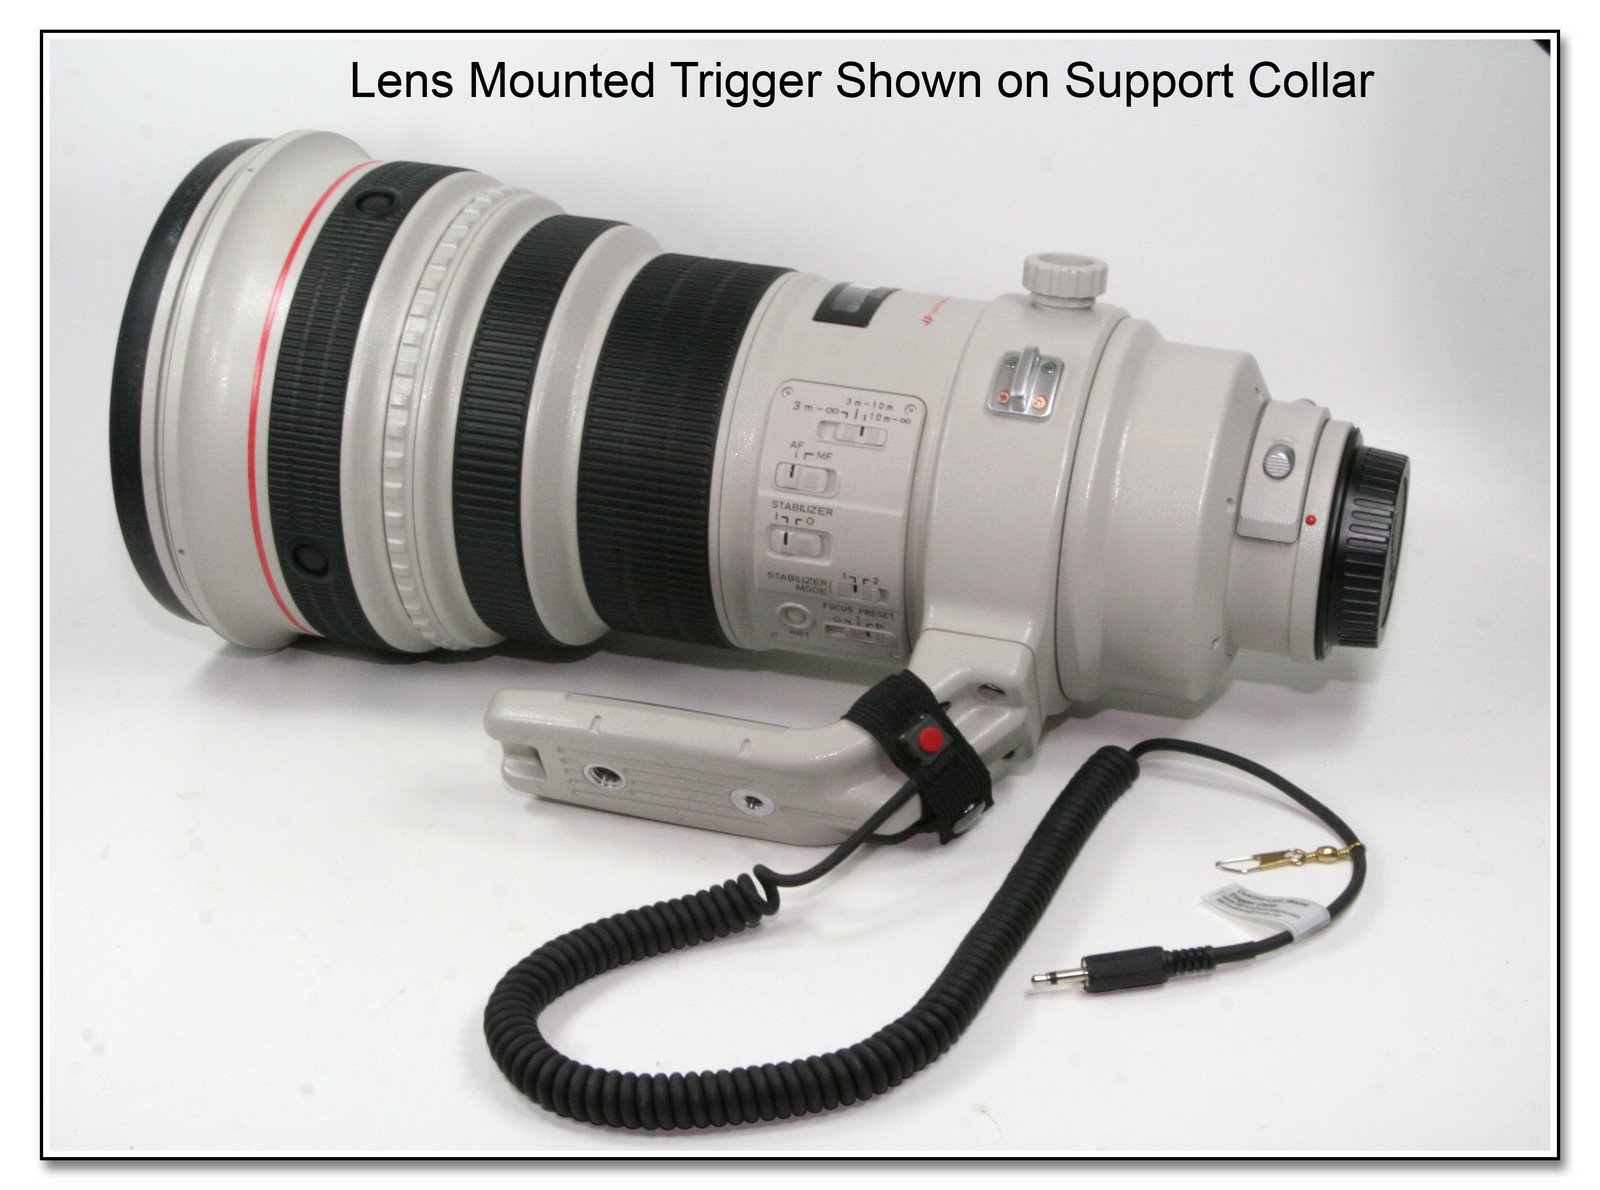 Lens Mounted Trigger Cable Wrapped around Support Foot of Lens